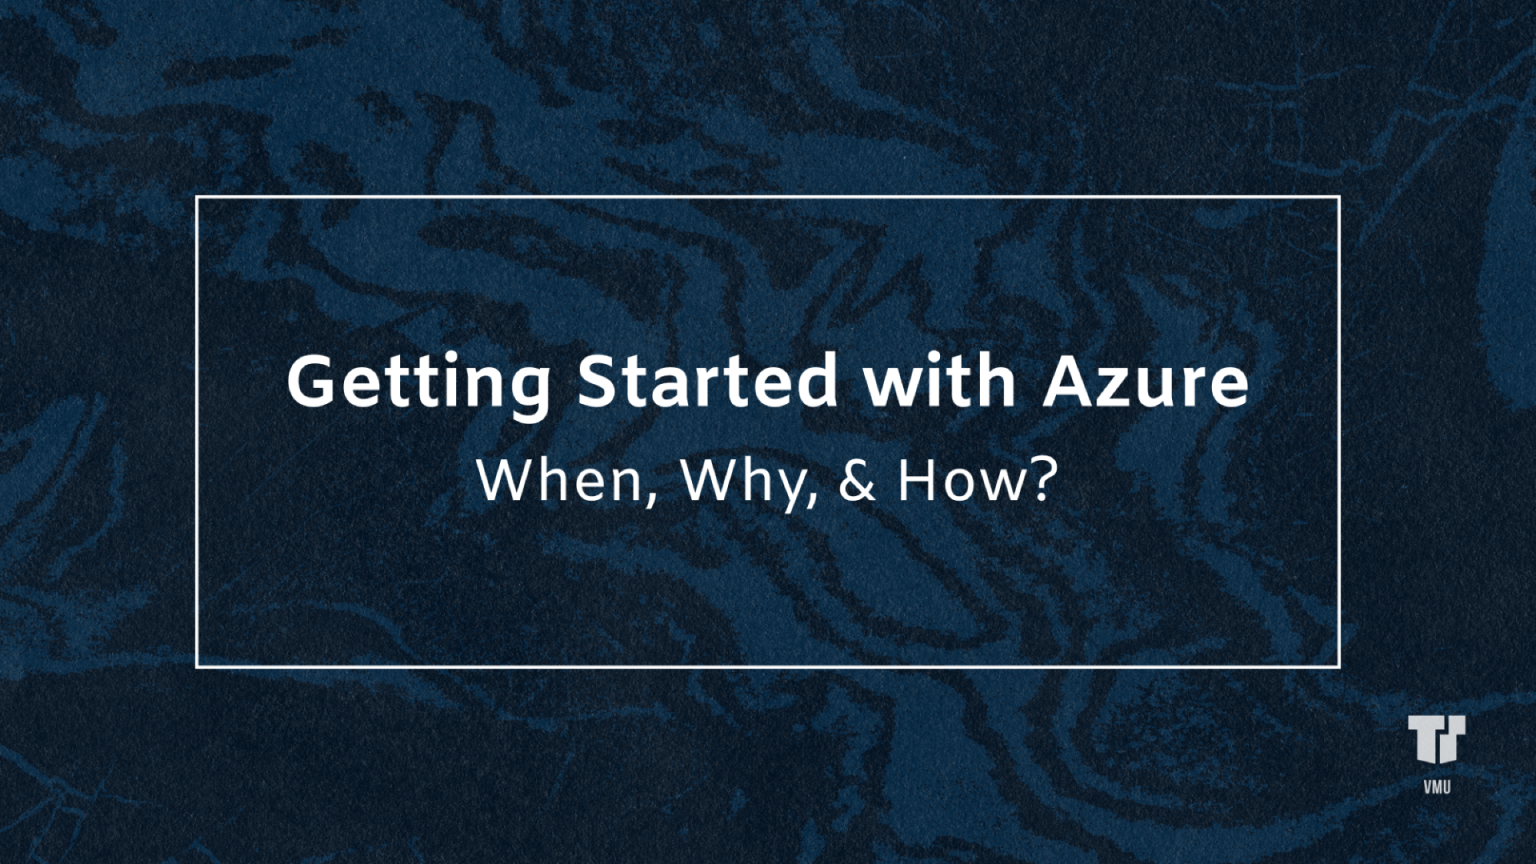 Getting Started with Azure: When, Why, & How